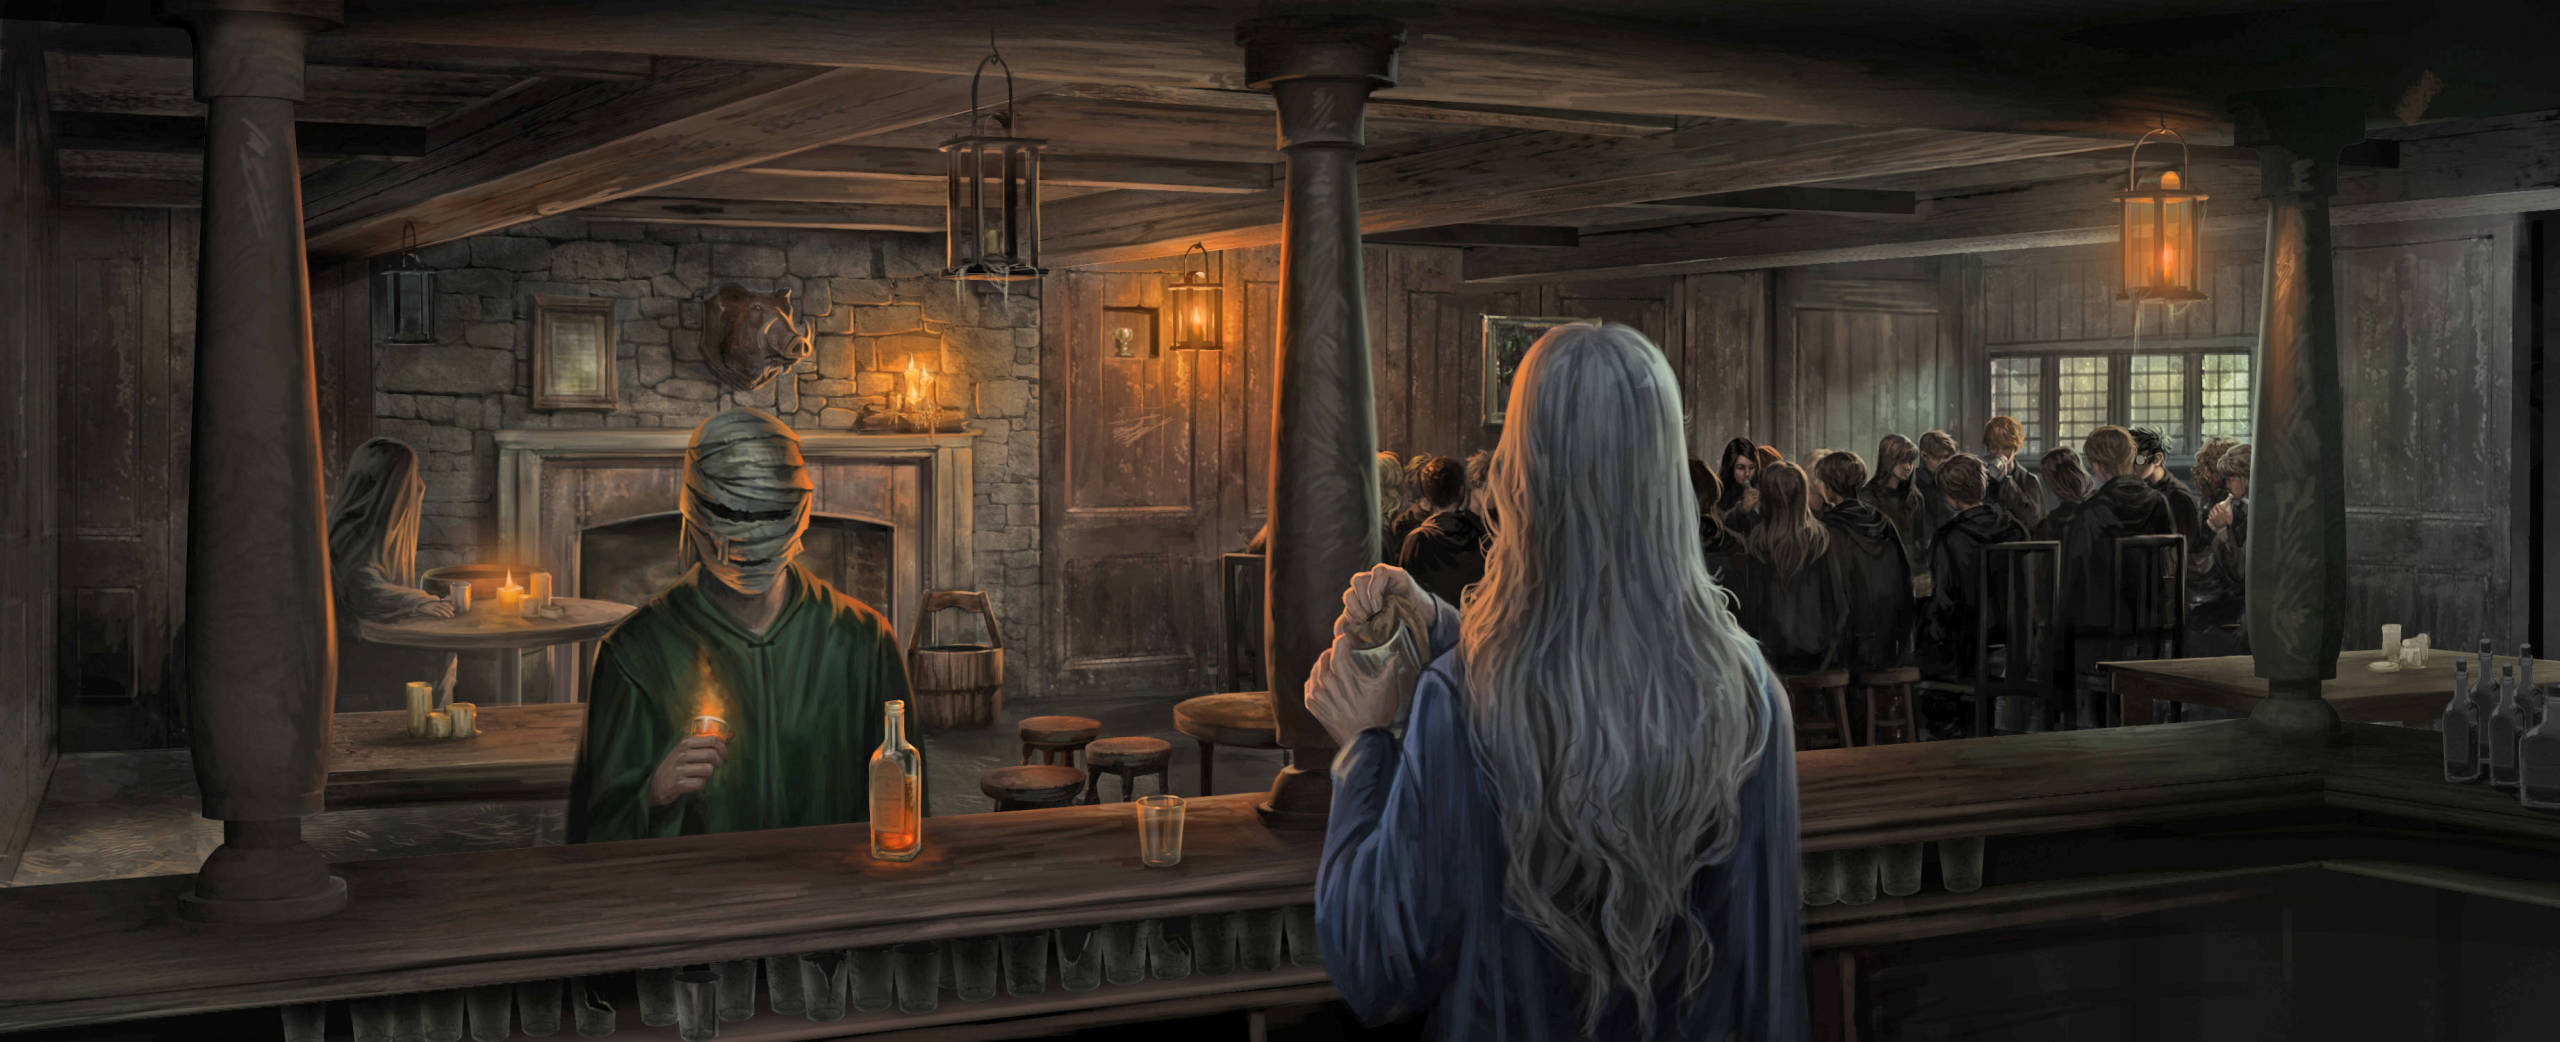 The first Dumbledore's Army meeting is held in the Hog's Head